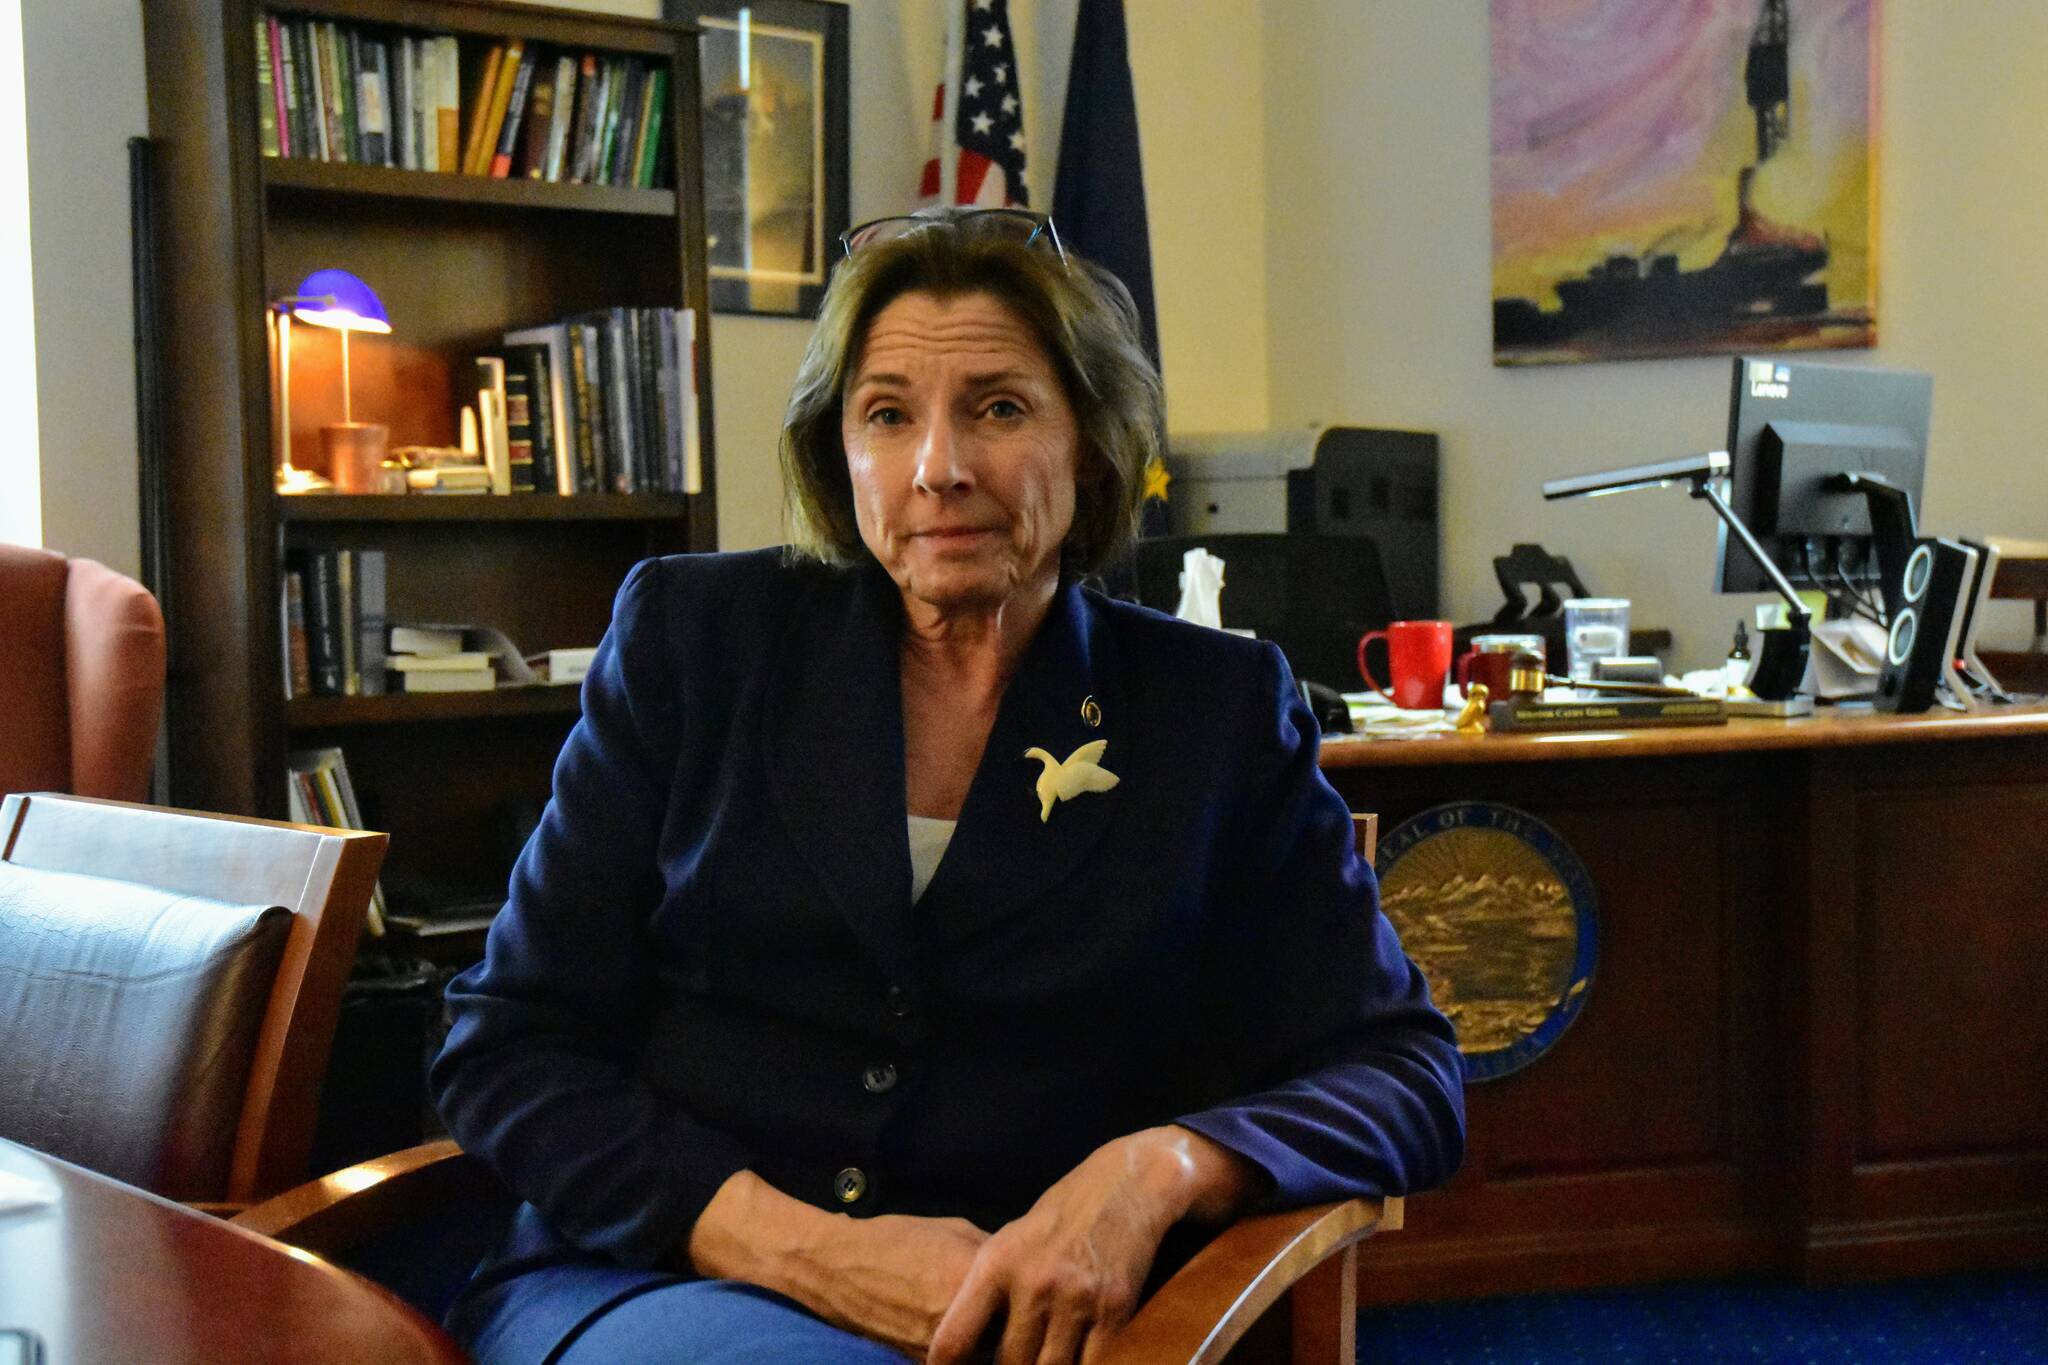 Peter Segall / Juneau Empire File 
Then-Senate President Cathy Giessel, R-Anchorage, sits in her office at the State Capitol in February 2020. After a recount, Giessel has been reaffirmed as the winner of a narrow three-way race for an Anchorage-area Senate seat.